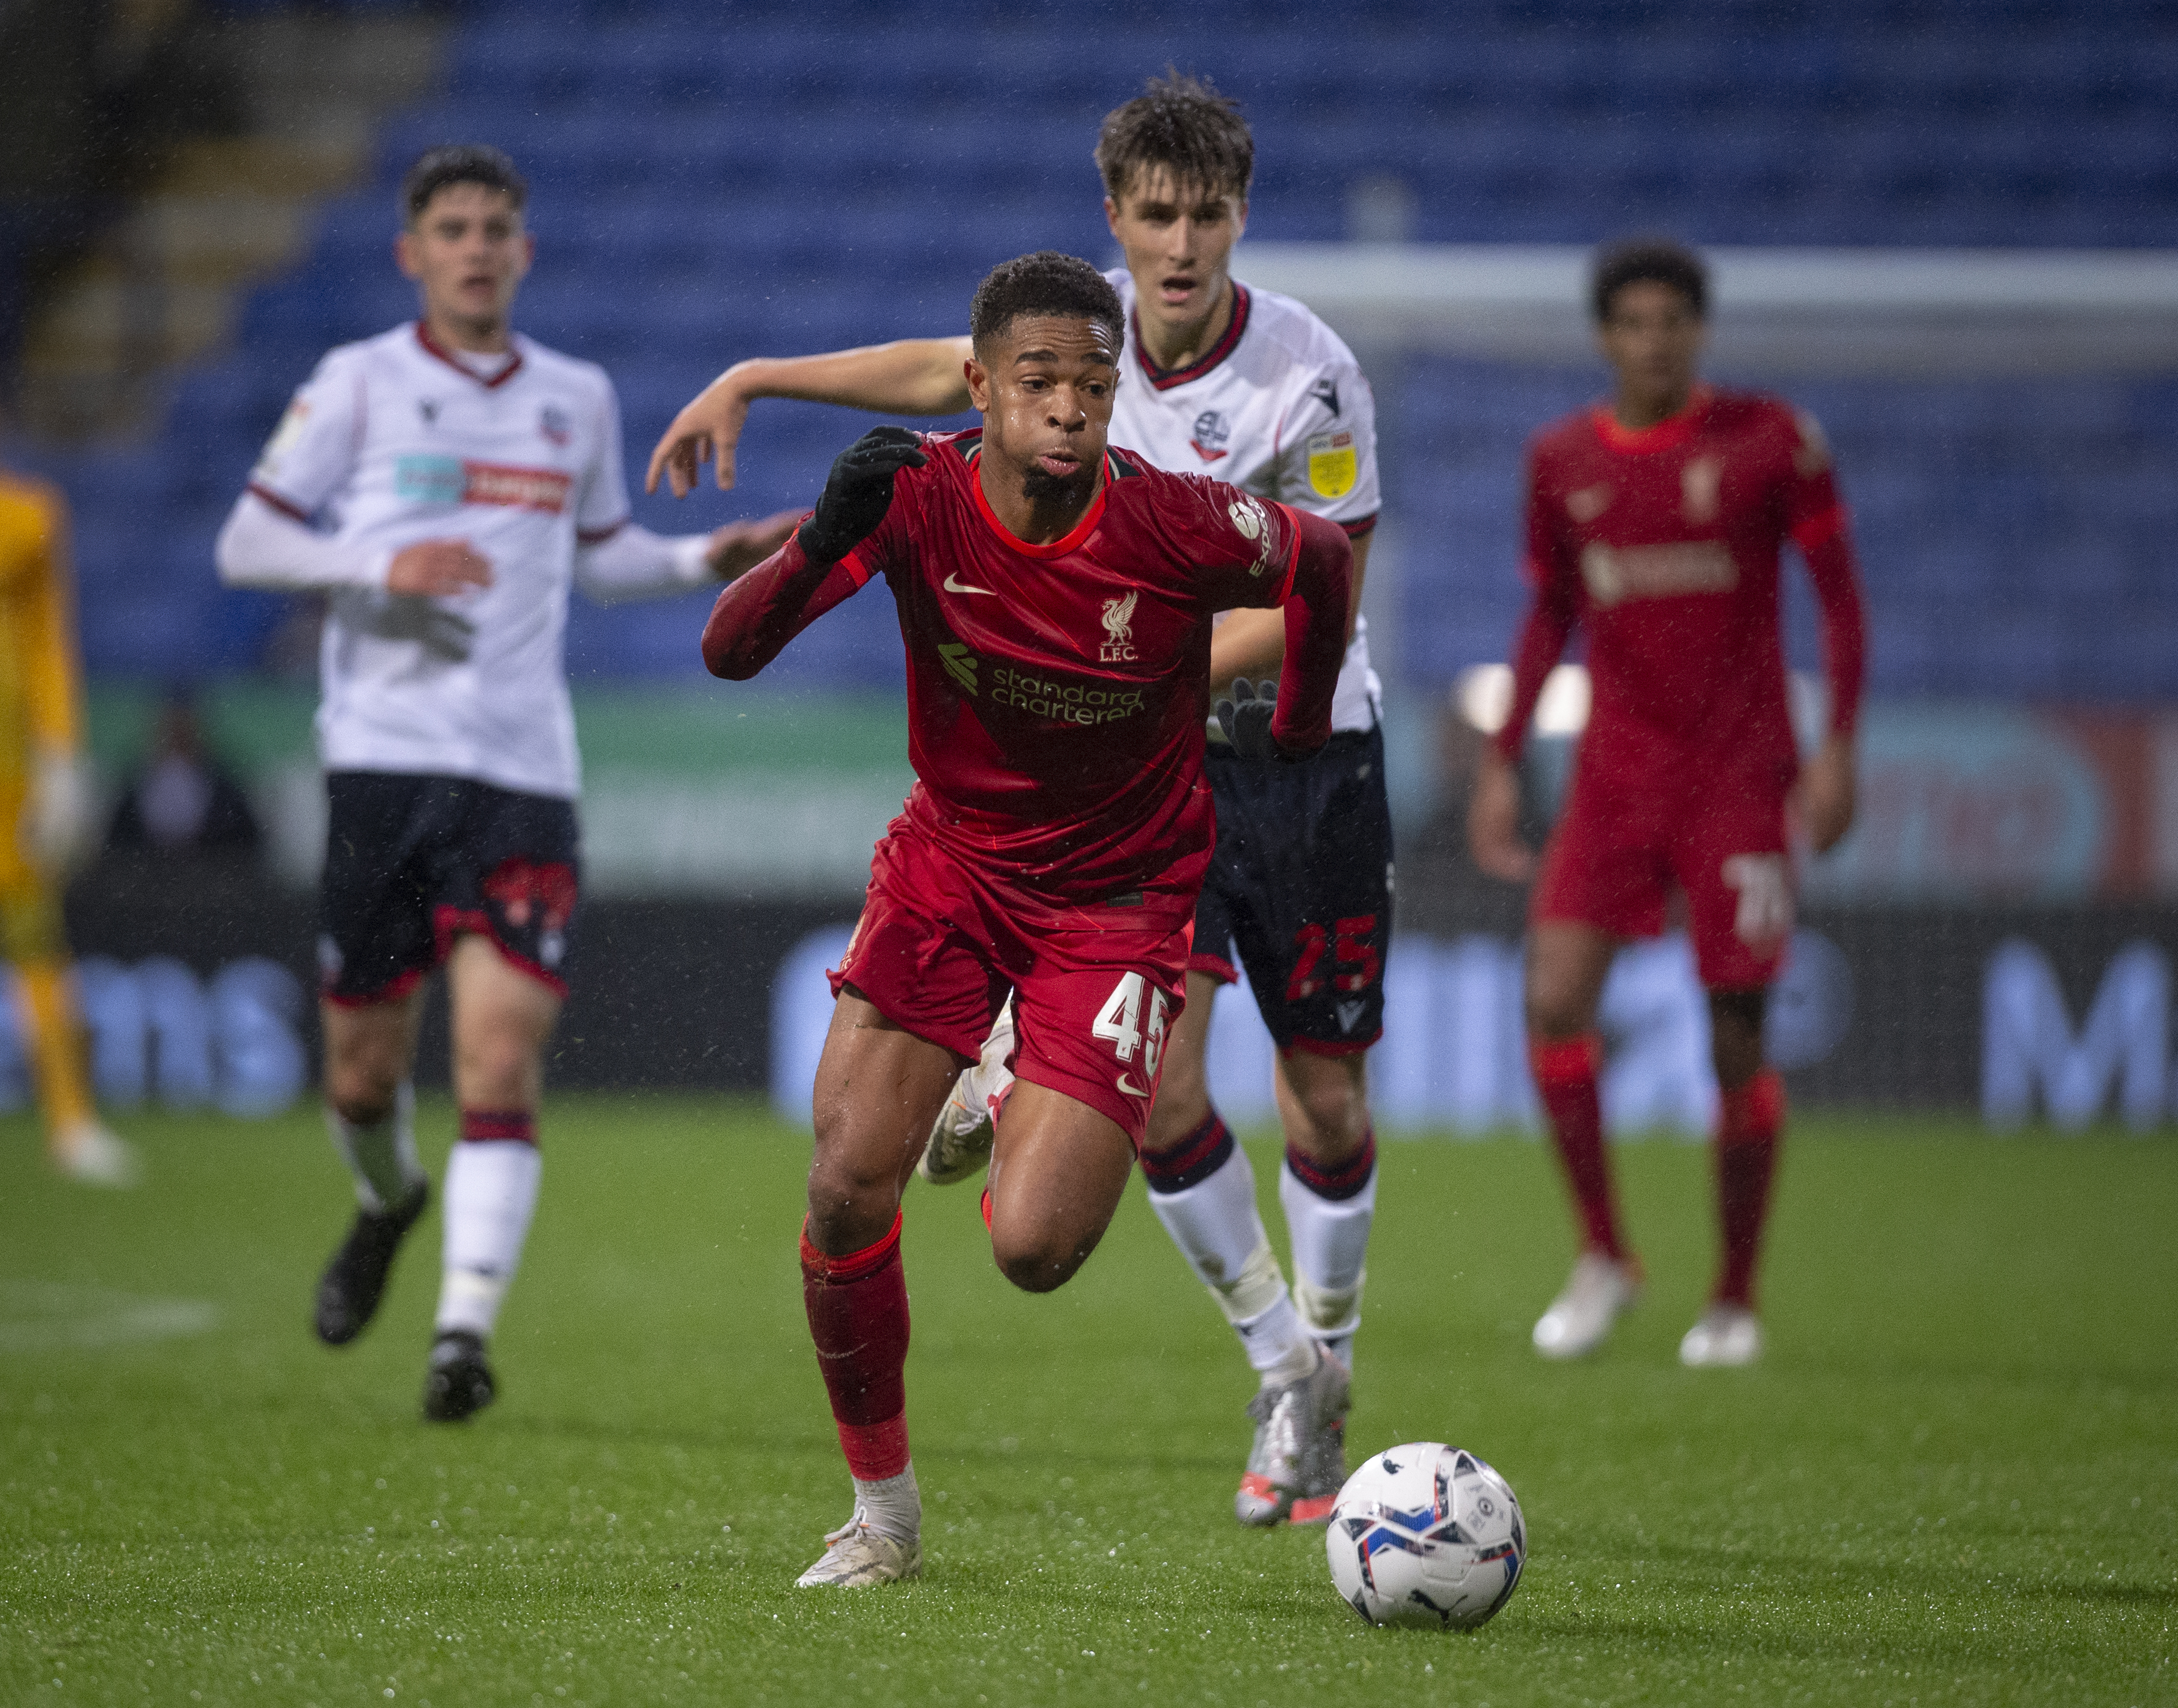 Elijah Dixon Bonner of Liverpool and George Thomason of Bolton Wanderers in action with Jarrell Quansah of Liverpool and Arran Pettifer of Bolton Wanderers during the Papa John’s EFL Trophy Northern Group D match between Bolton Wanderers and Liverpool U21’s at University of Bolton Stadium on October 5, 2021 in Bolton, England.